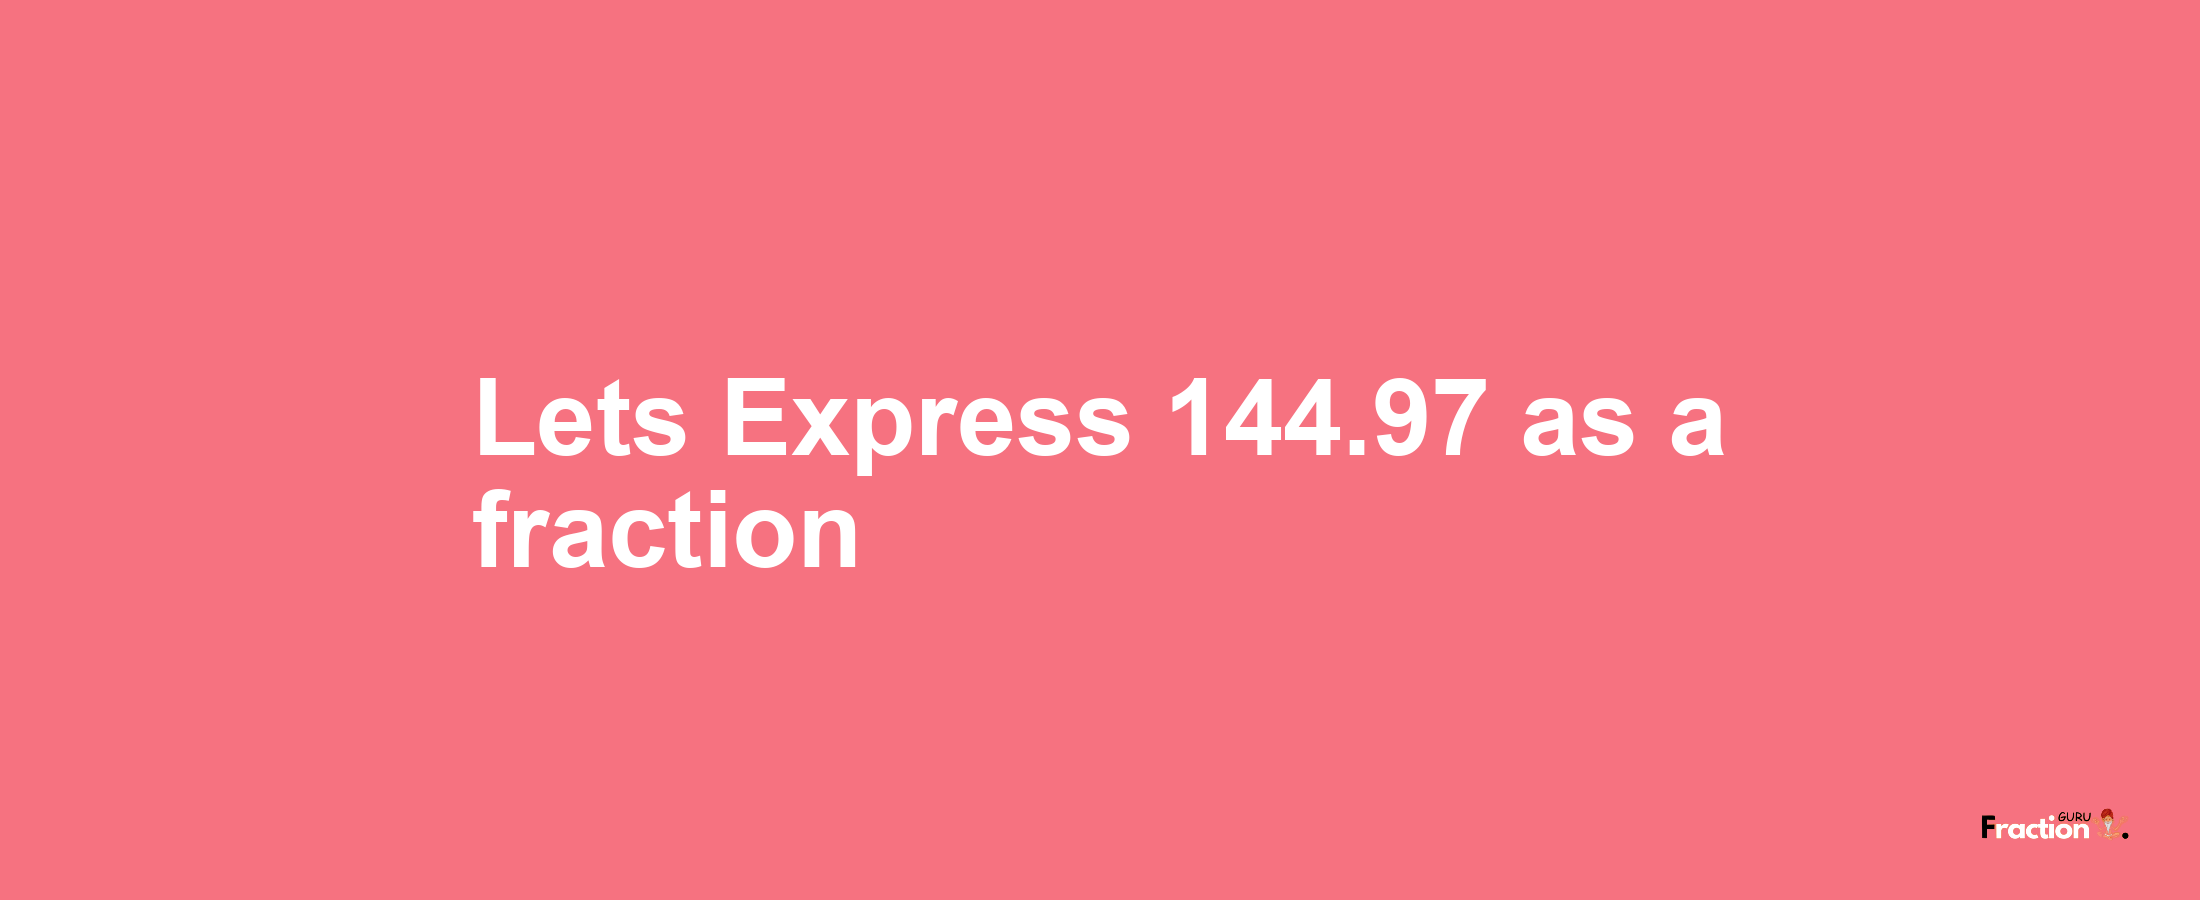 Lets Express 144.97 as afraction